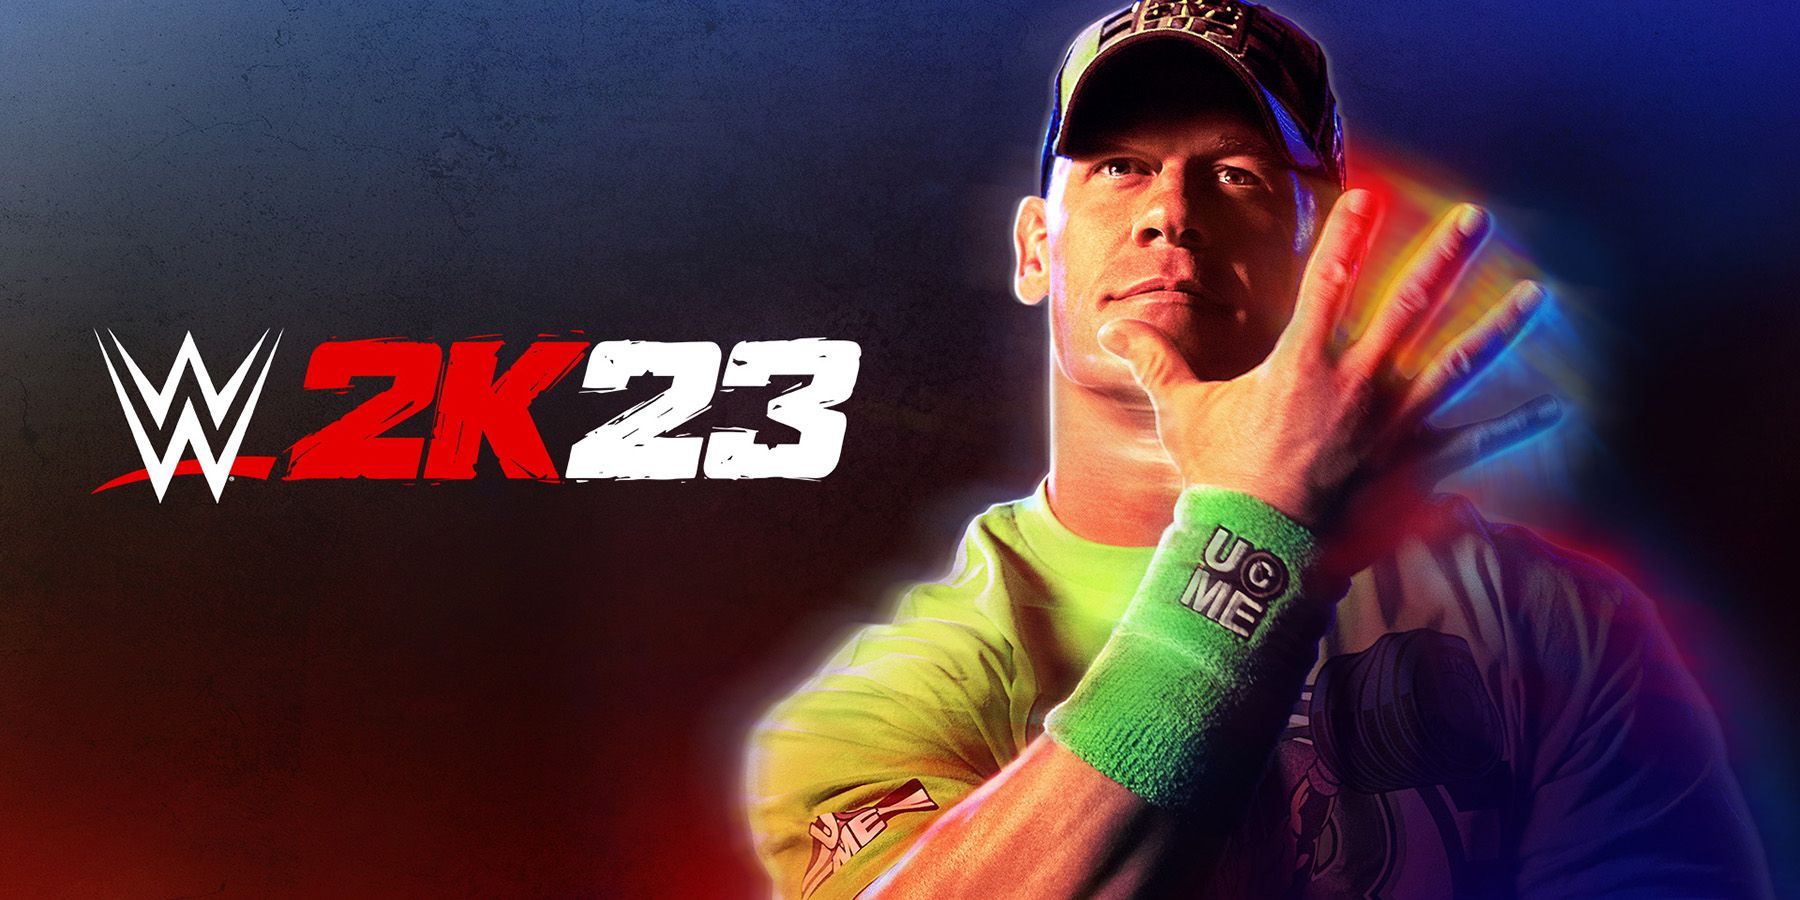 WWE 2K23 HandsOn Preview WarGames, Showcase Mode, and More